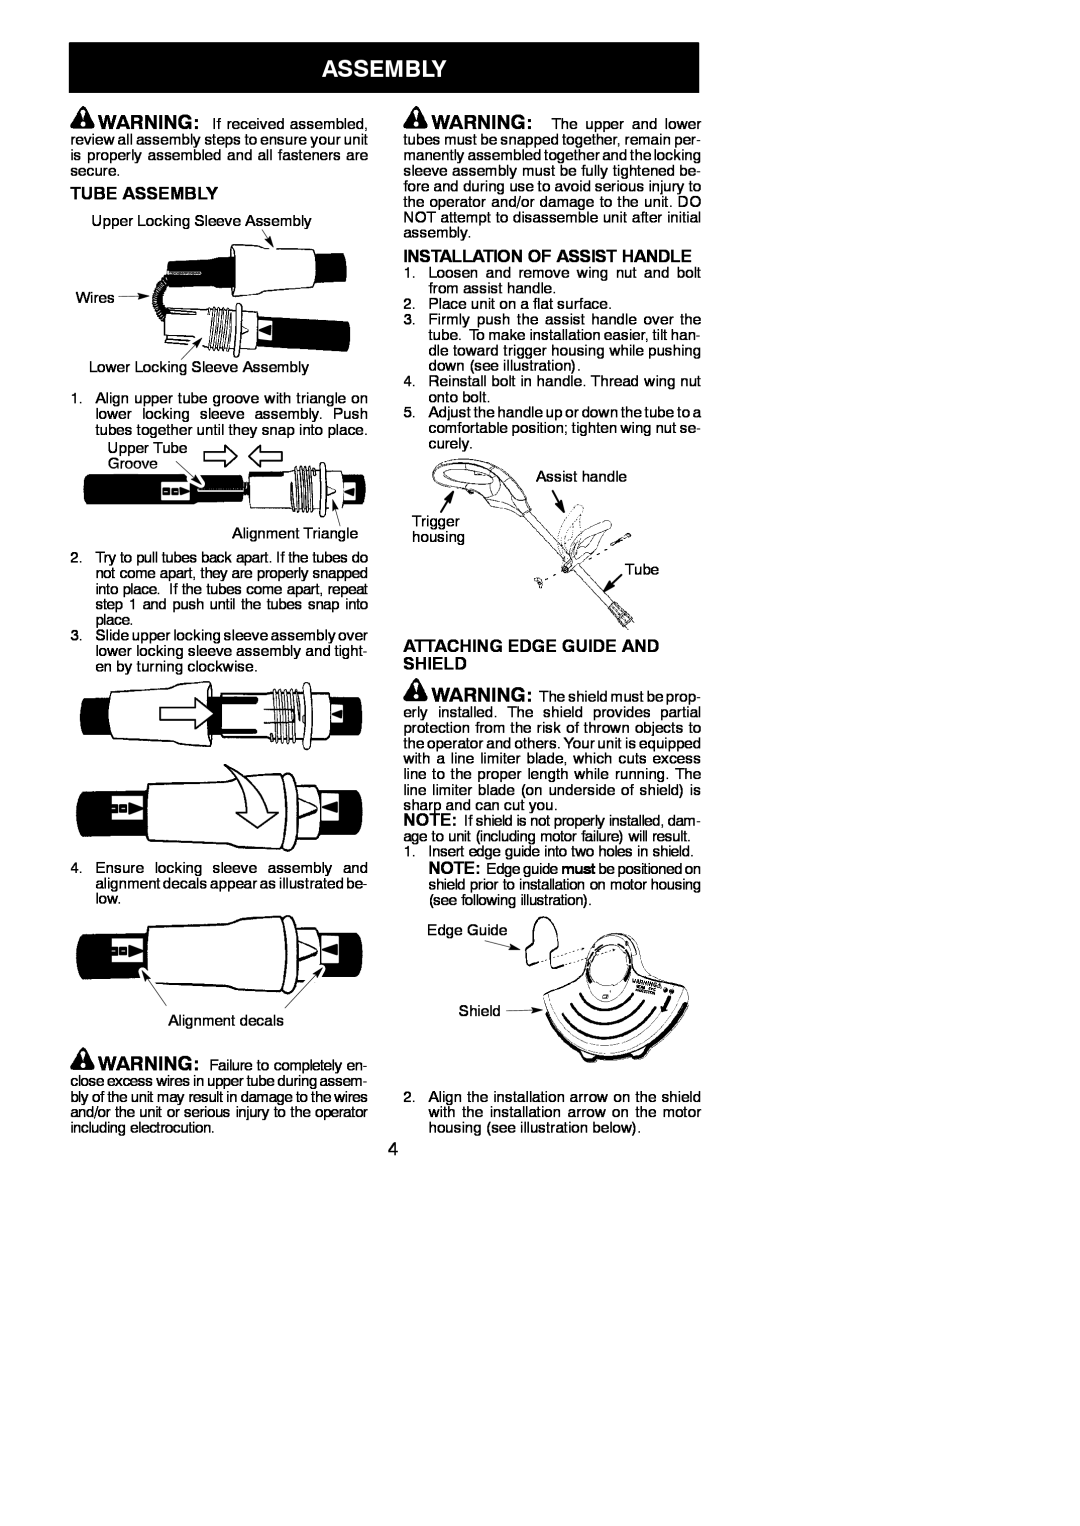 Weed Eater 952711905 instruction manual Tube Assembly, Installation Of Assist Handle, Attaching Edge Guide And Shield 